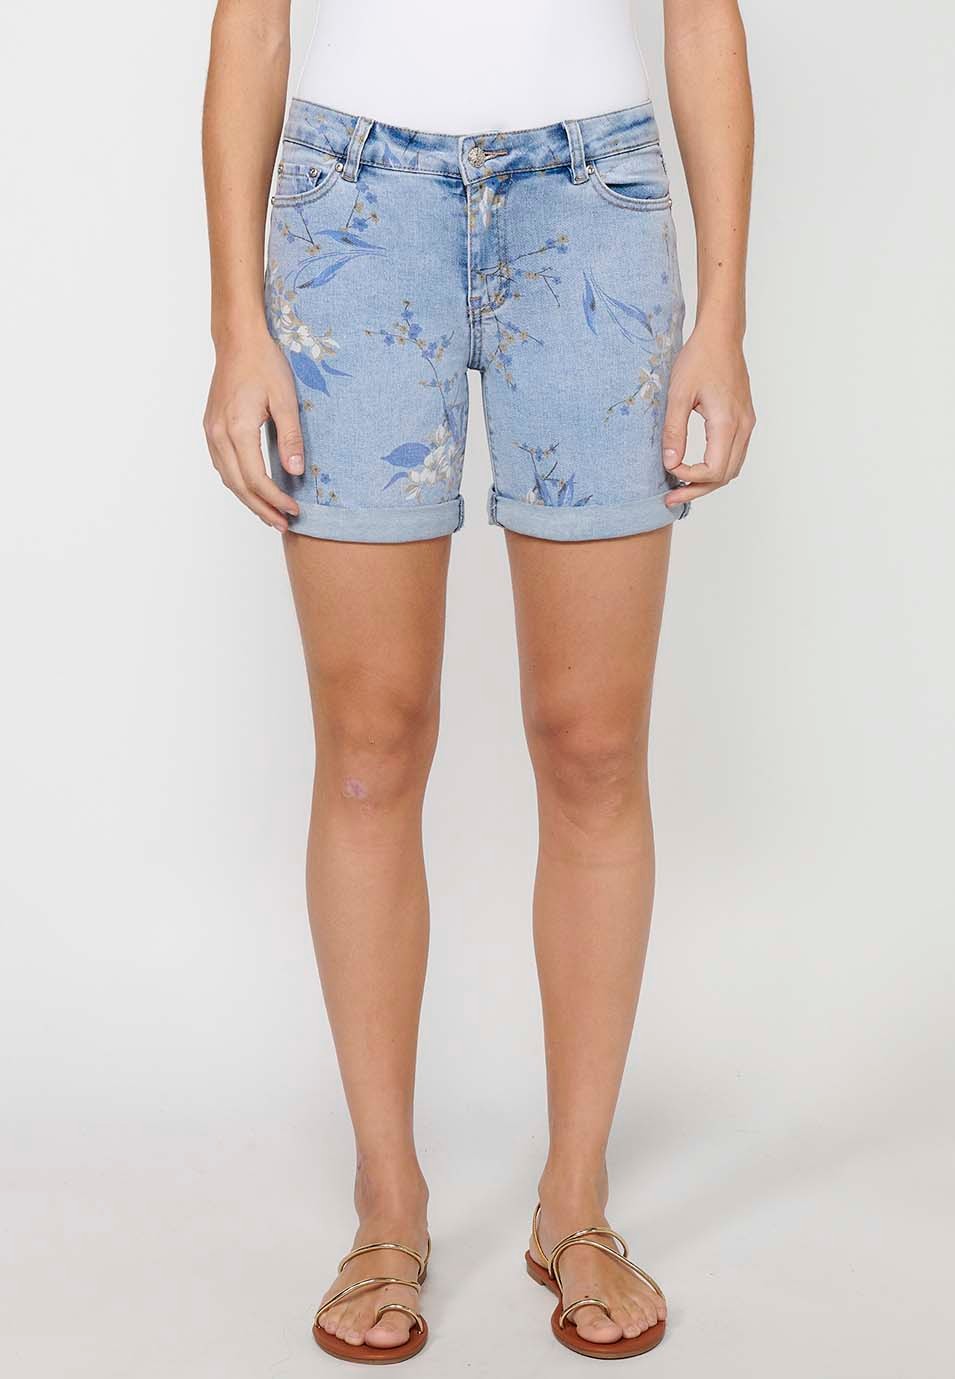 Shorts with a turn-up finish with zipper and button closure with a Blue floral print for Women 2